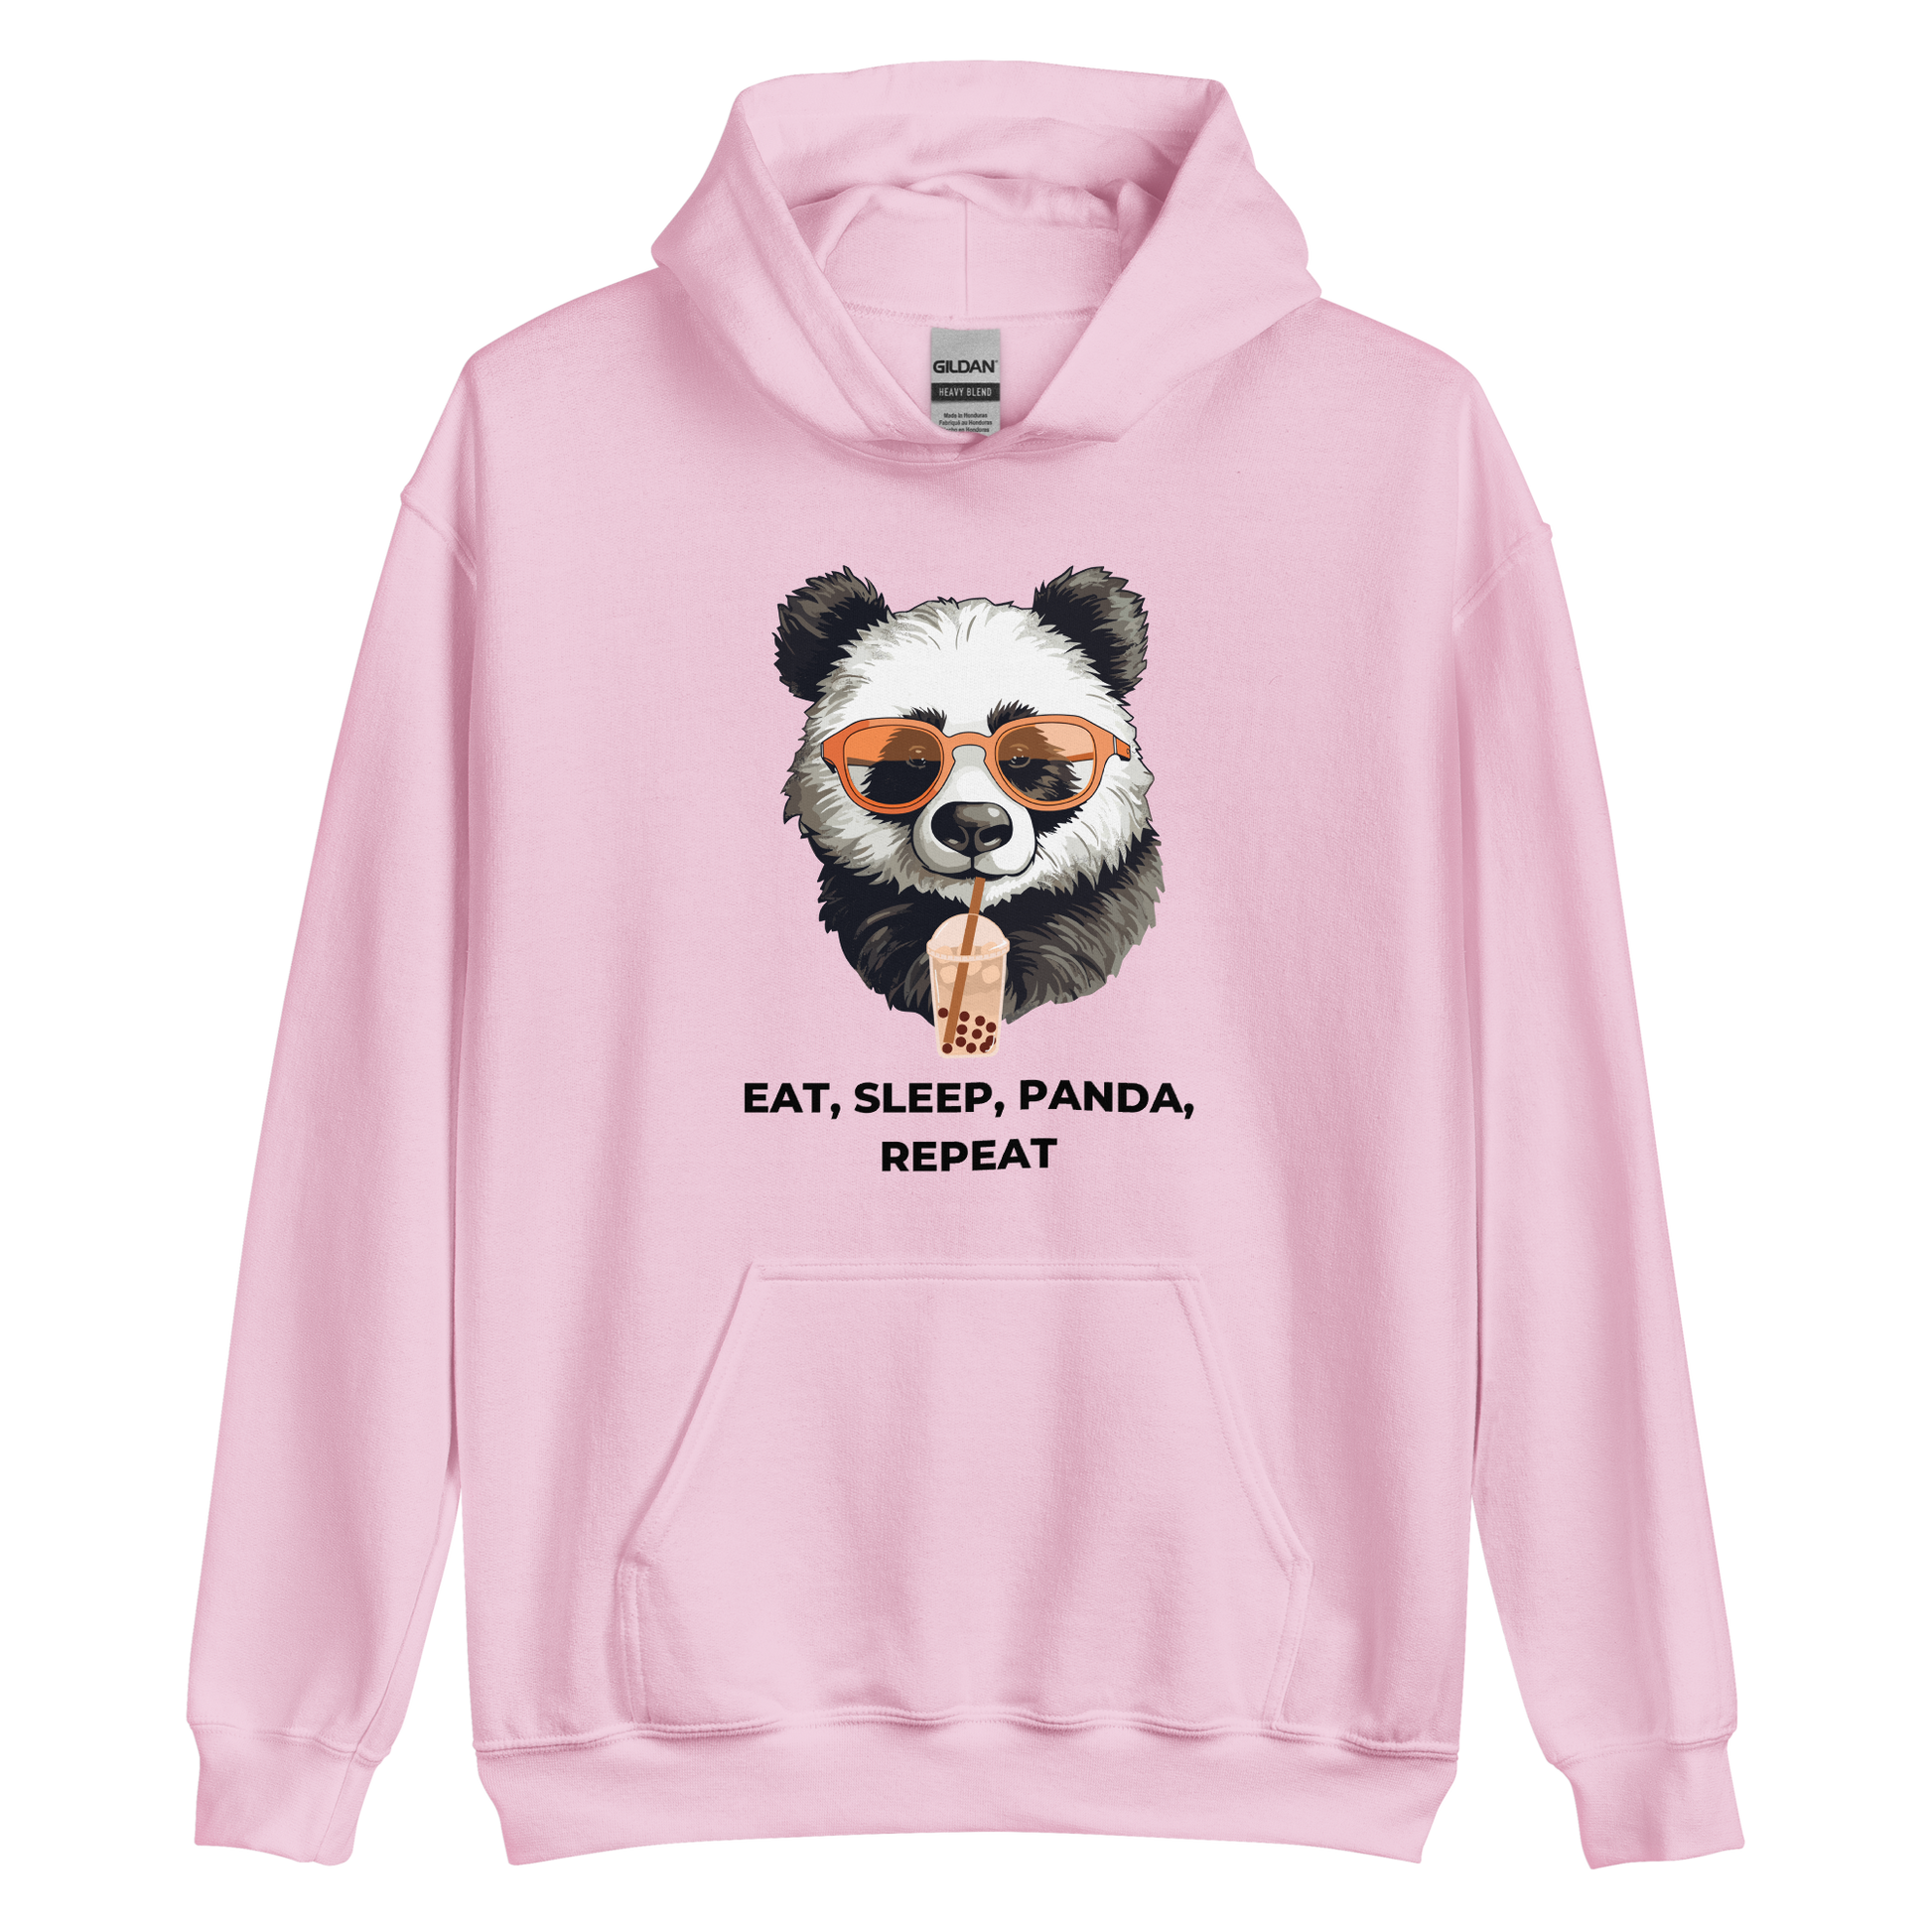 Light Pink Panda Hoodie featuring the hilarious Eat, Sleep, Panda, Repeat graphic on the chest - Funny Graphic Panda Hoodies - Boozy Fox